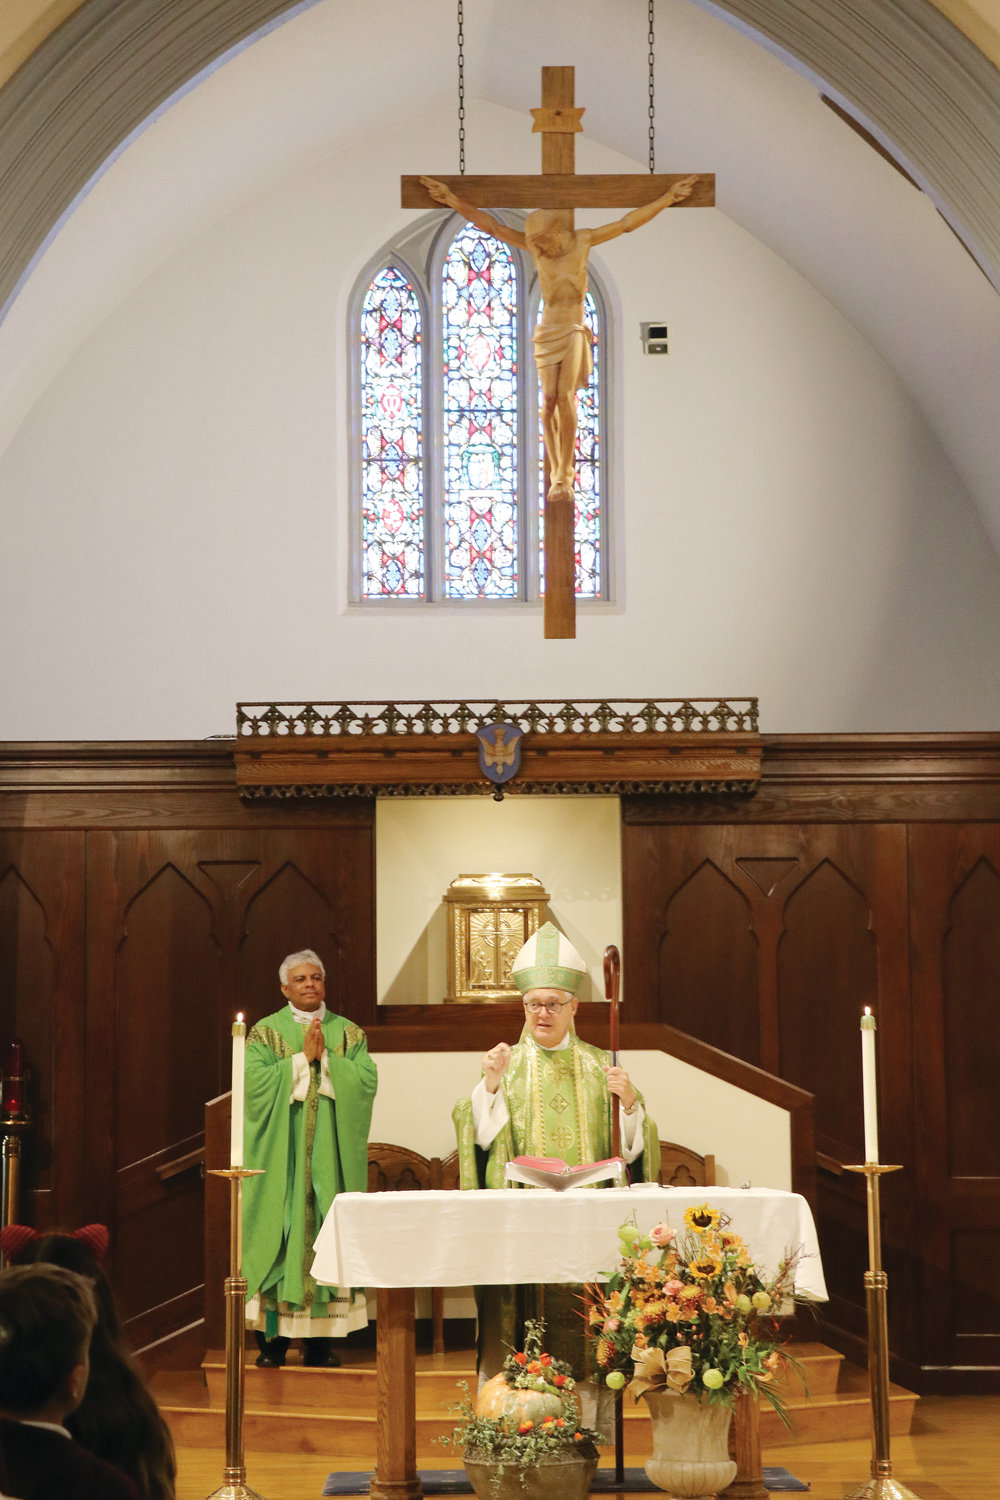 Father TJ Varghese concelebrates Mass with Bishop Tobin.